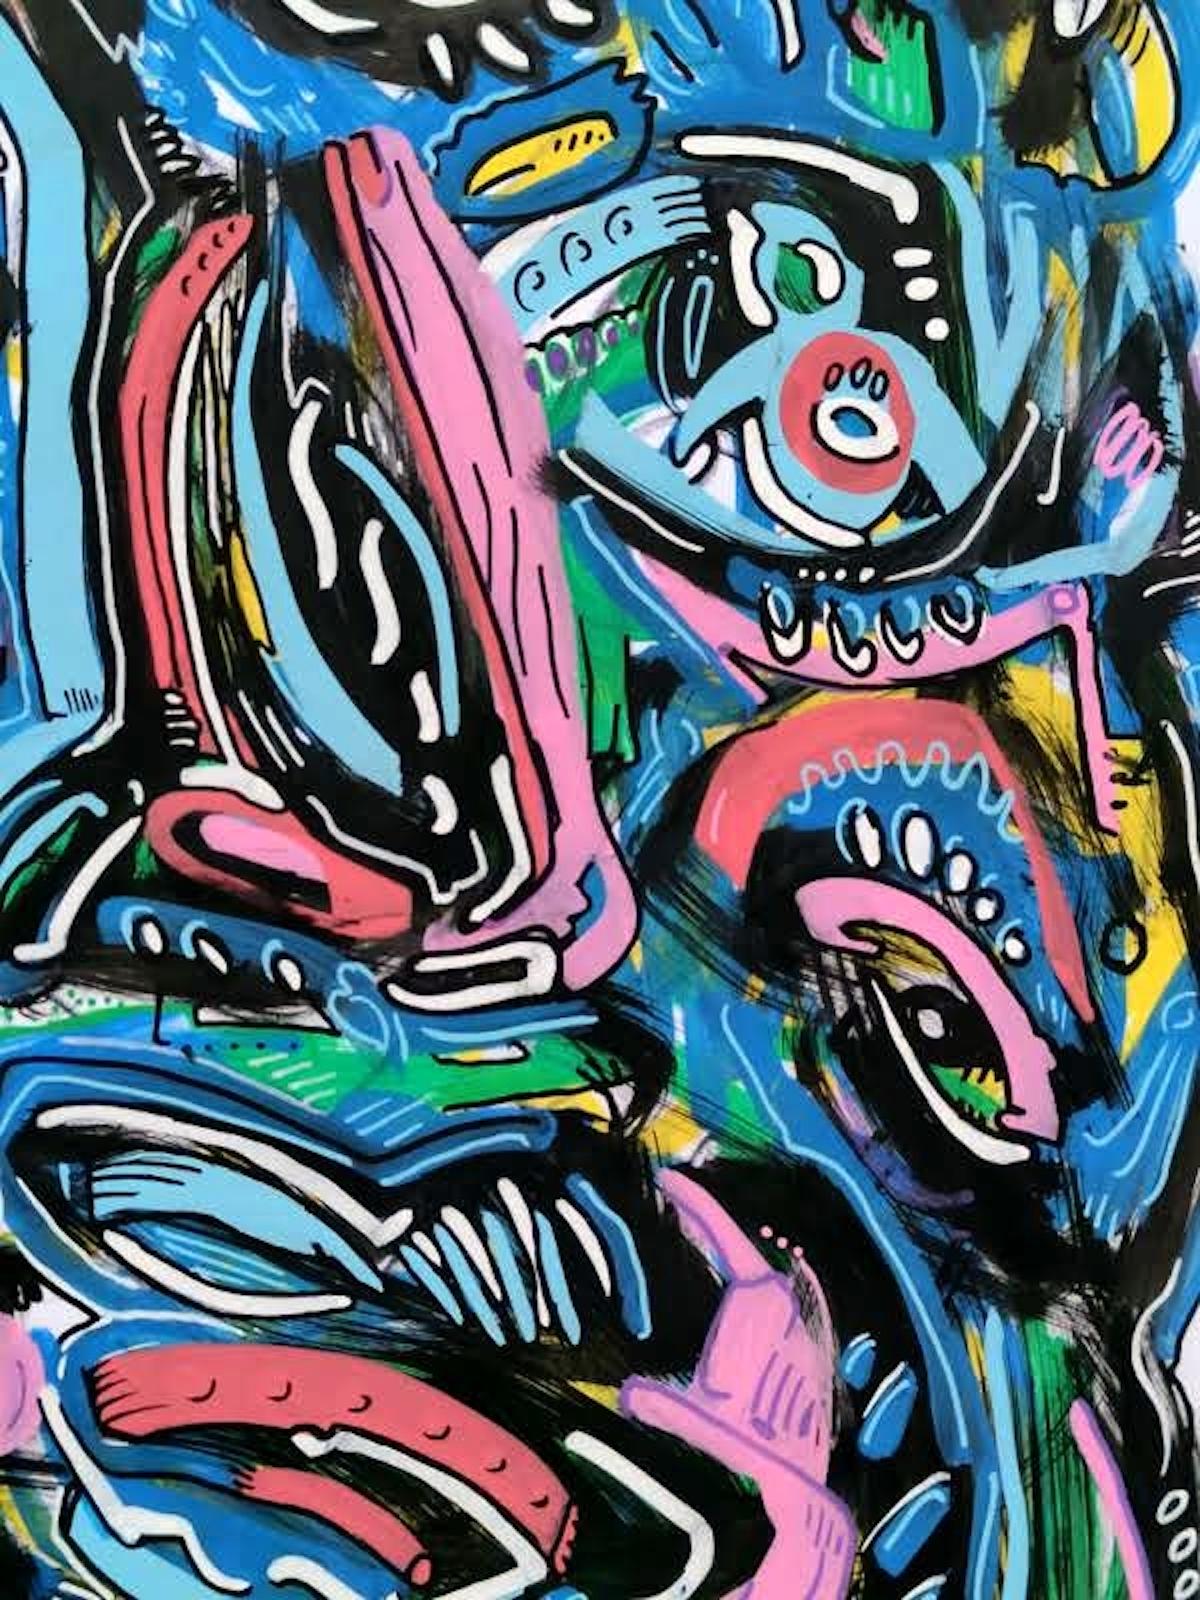 ABSTRACT FACE - Neo-Expressionist Painting by Angel Rivas